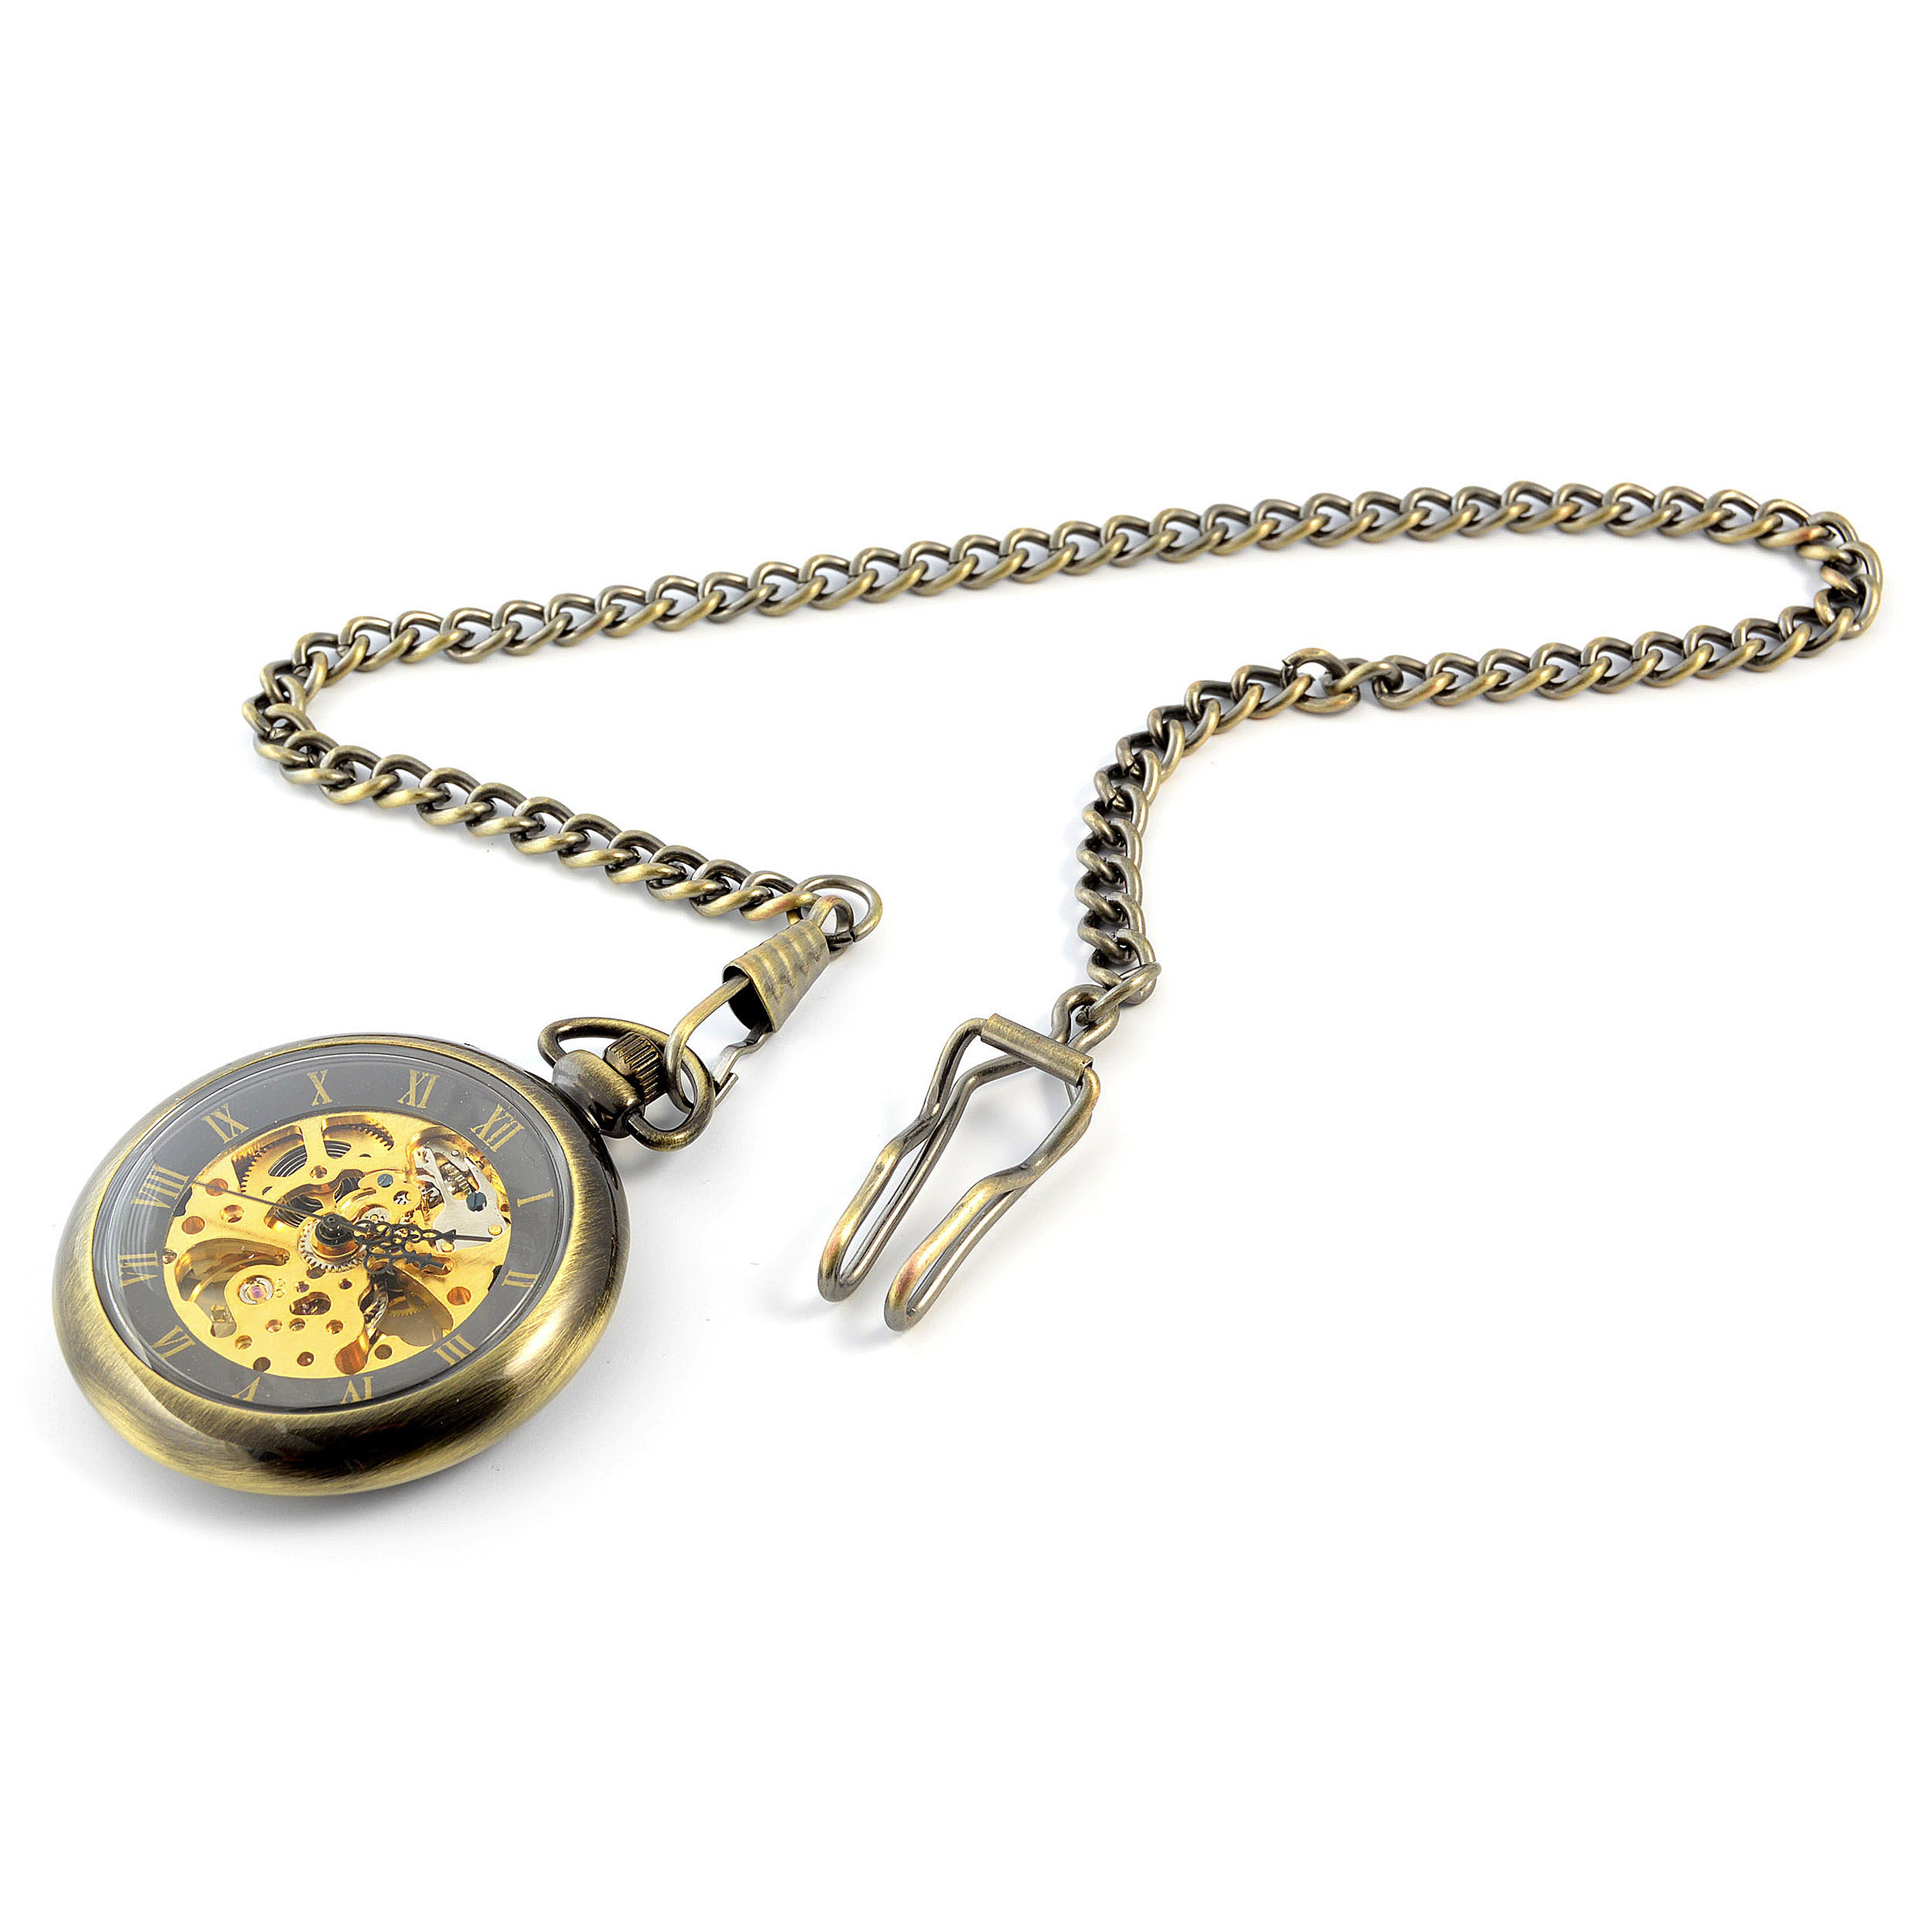 Gold-Tone Retro Mechanical Pocket Watch With Gold-Tone Movement & Gold-Tone Cable Chain